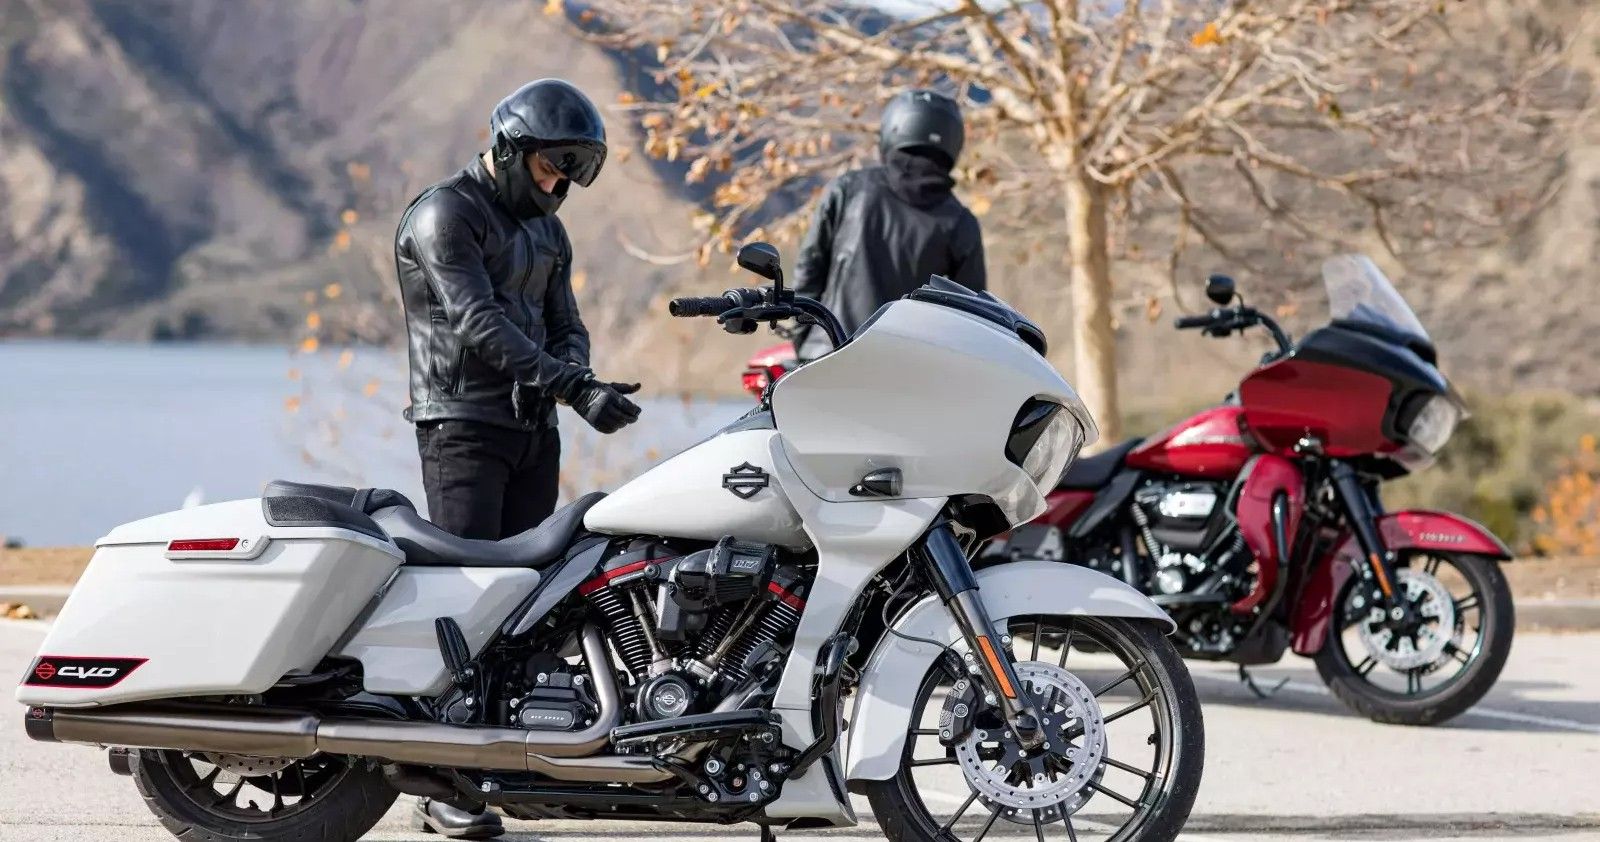 HarleyDavidson Road Glide Vs Street Glide Here's Which One Is Better